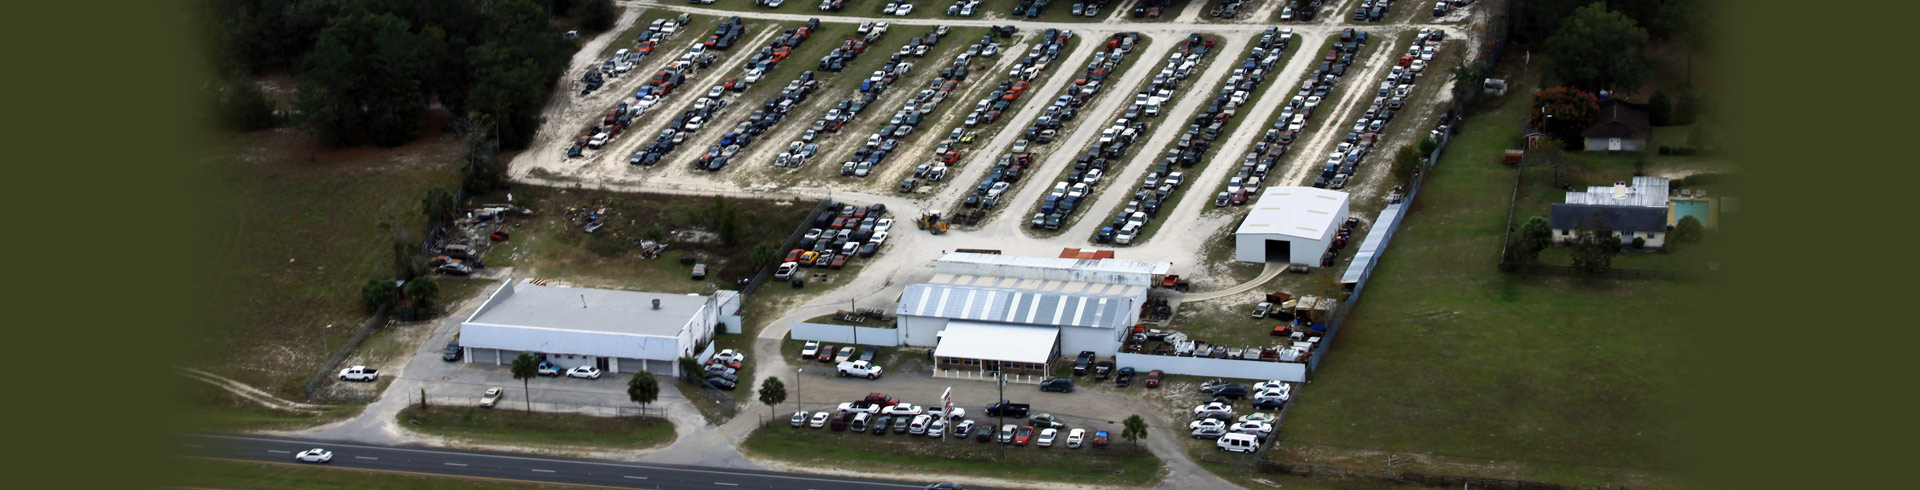 Salvage Yard in Chiefland, Gilchrist County, Madison County